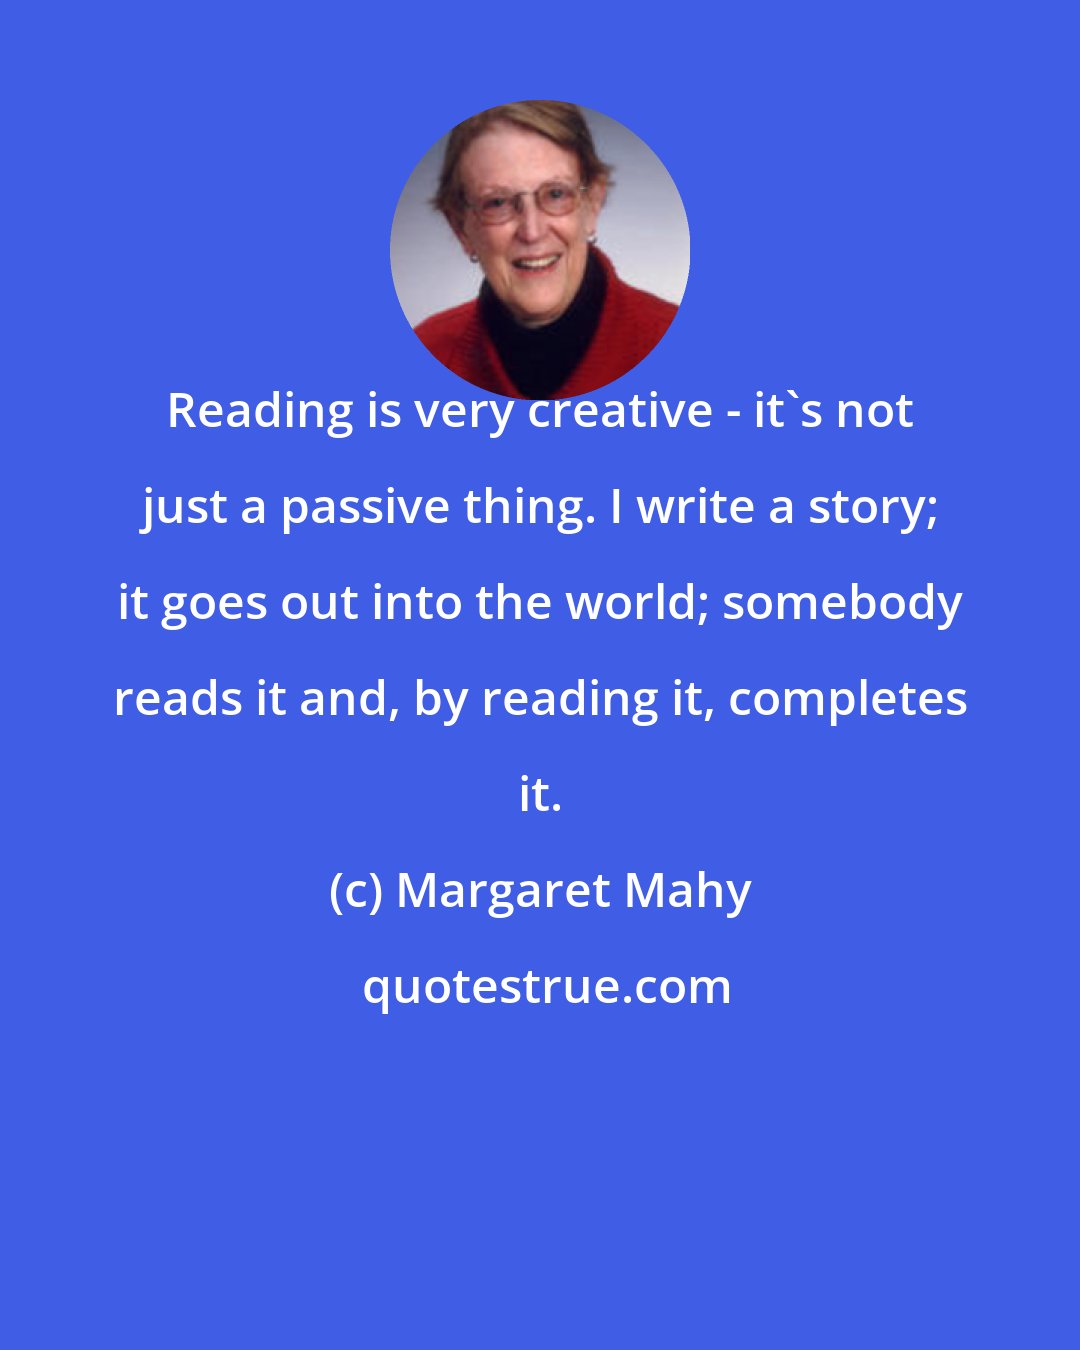 Margaret Mahy: Reading is very creative - it's not just a passive thing. I write a story; it goes out into the world; somebody reads it and, by reading it, completes it.